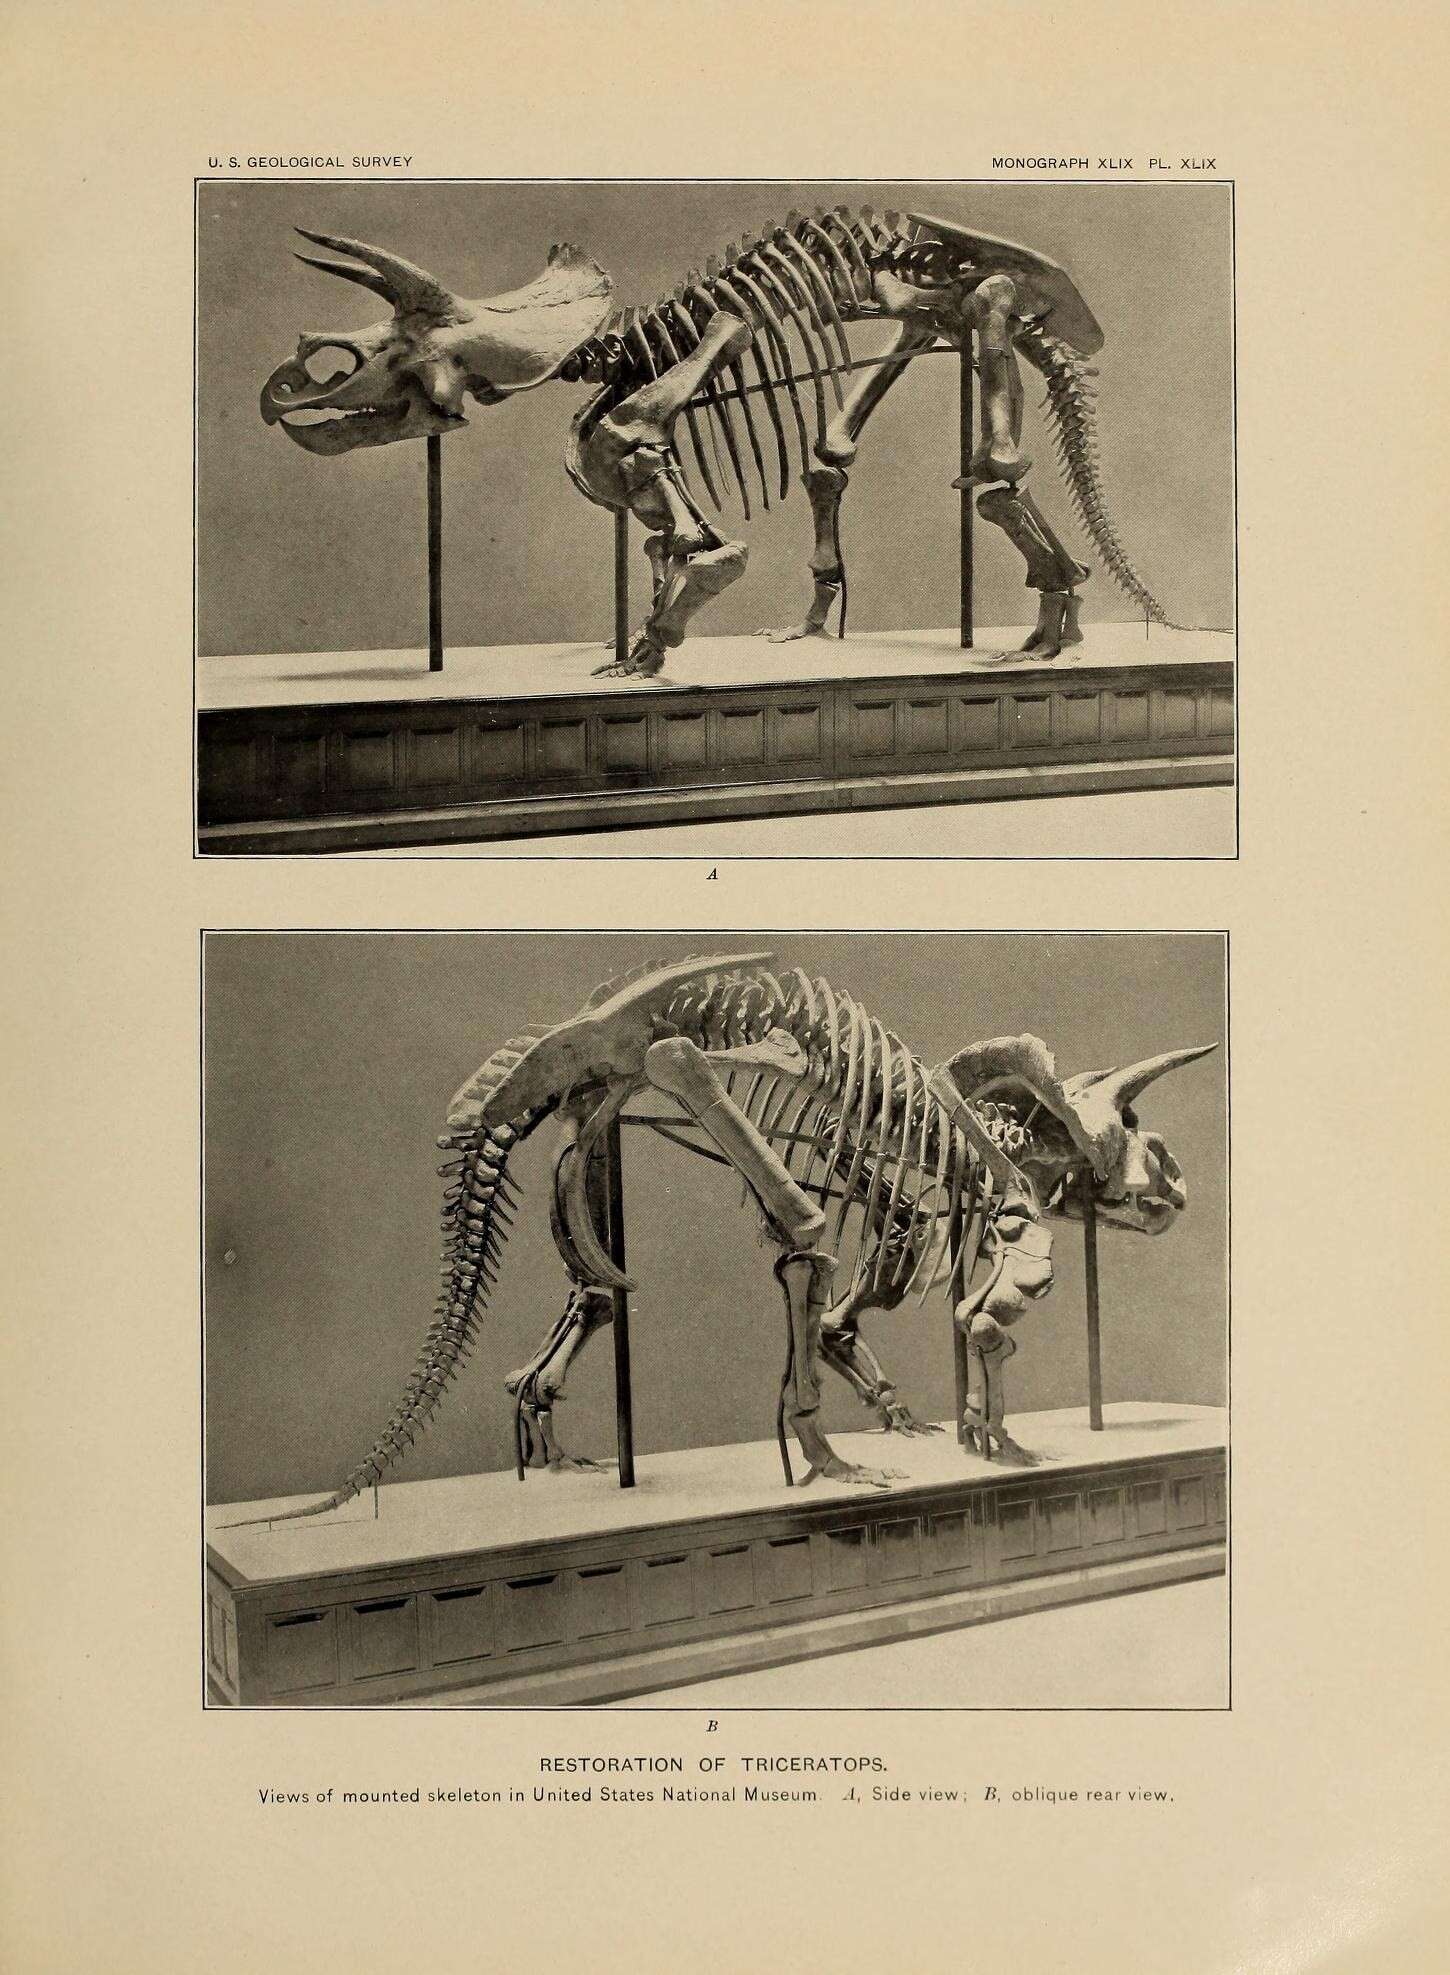 Image of ceratopsians